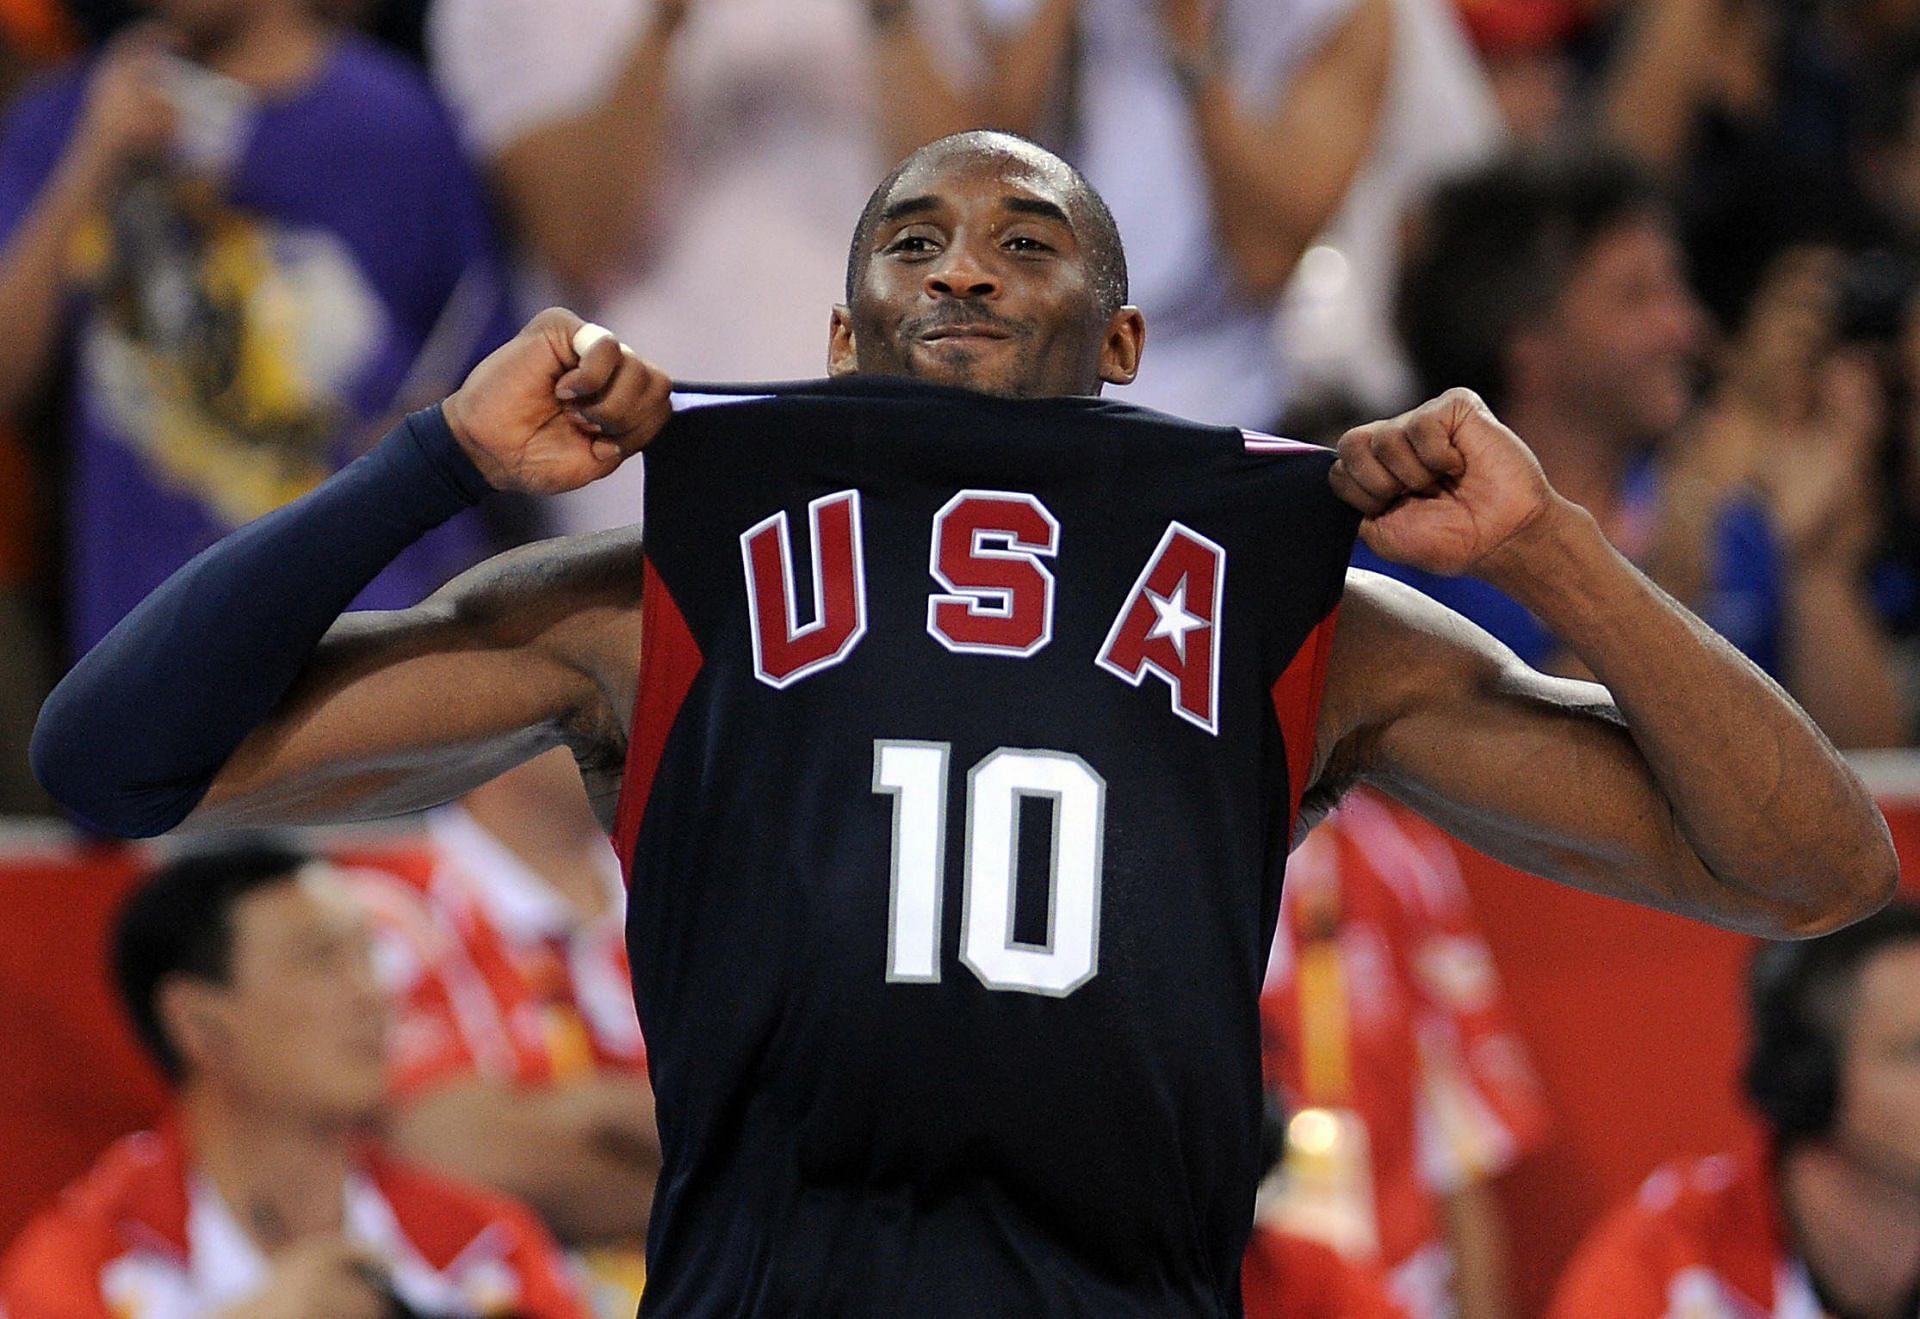 The legendary Kobe Bryant once recruited Coach K to join the LA Lakers.